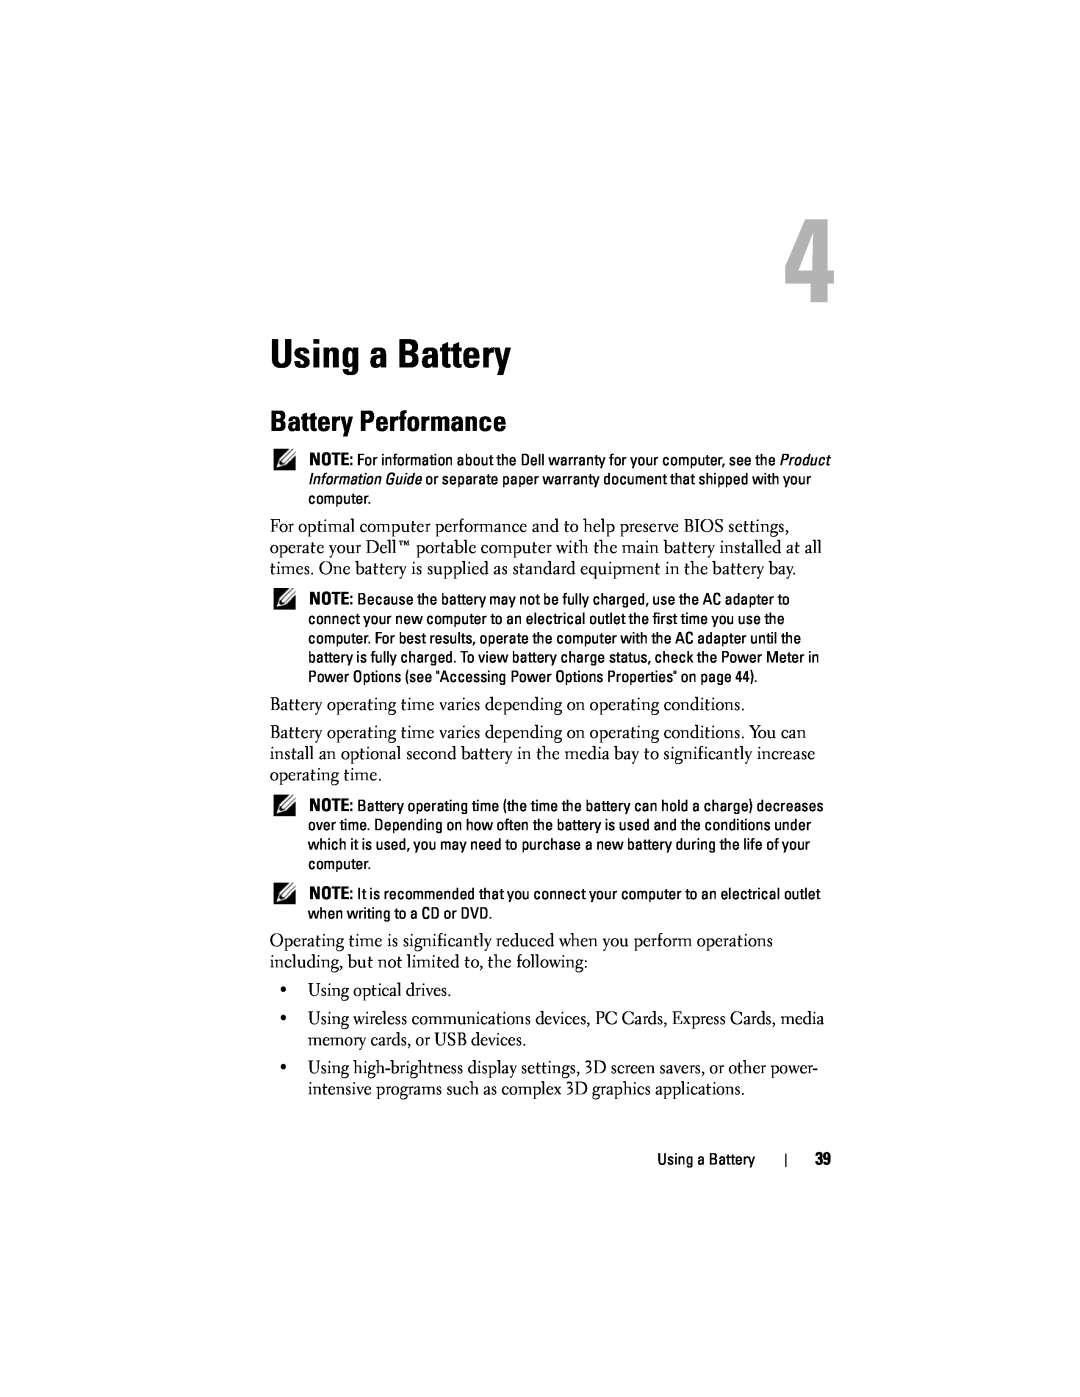 Dell D530 manual Using a Battery, Battery Performance 